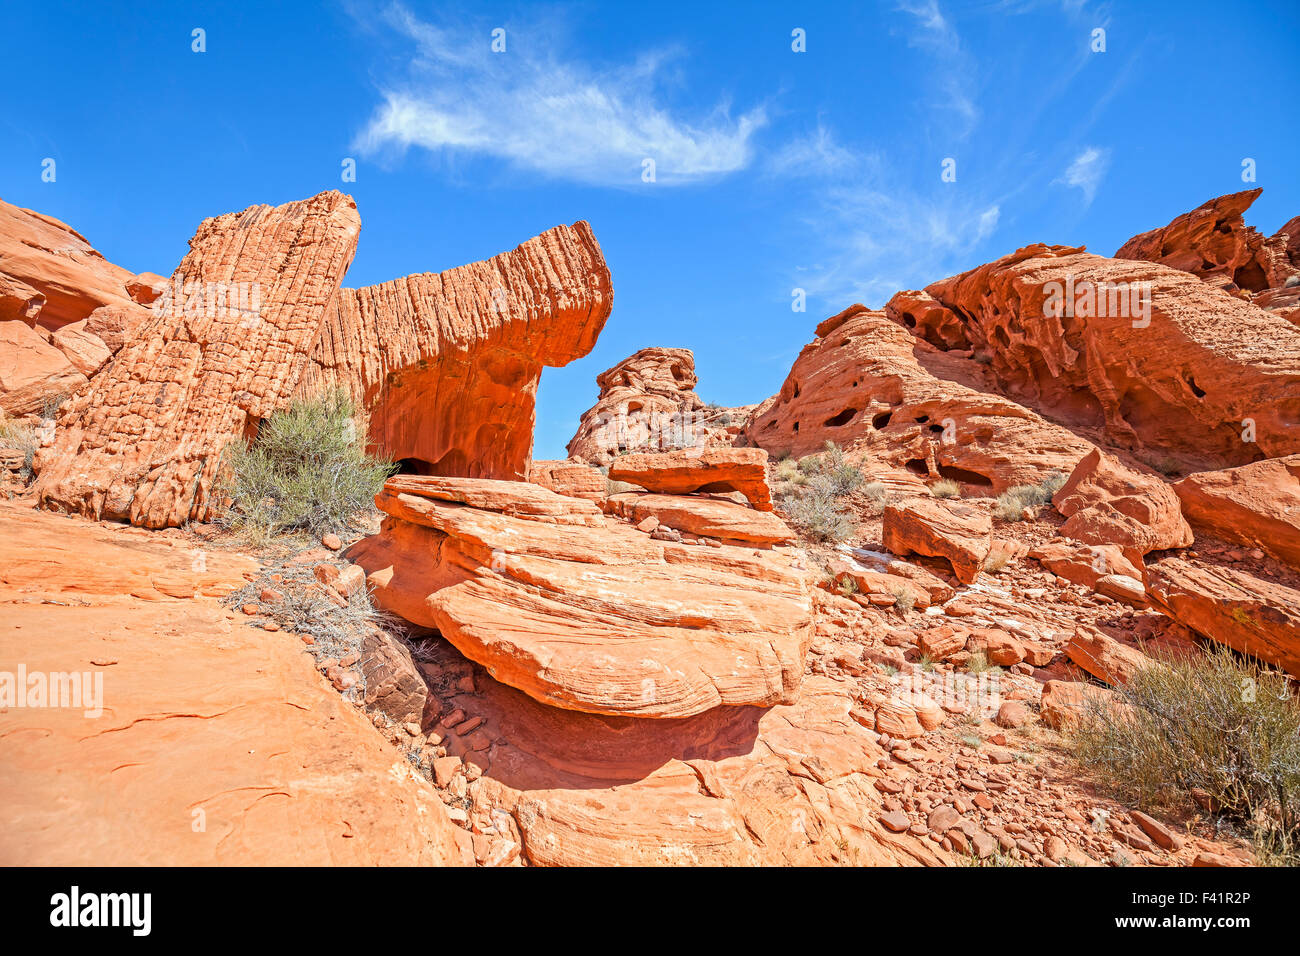 Rock formations in Valley of Fire State Park, Nevada, USA. Stock Photo